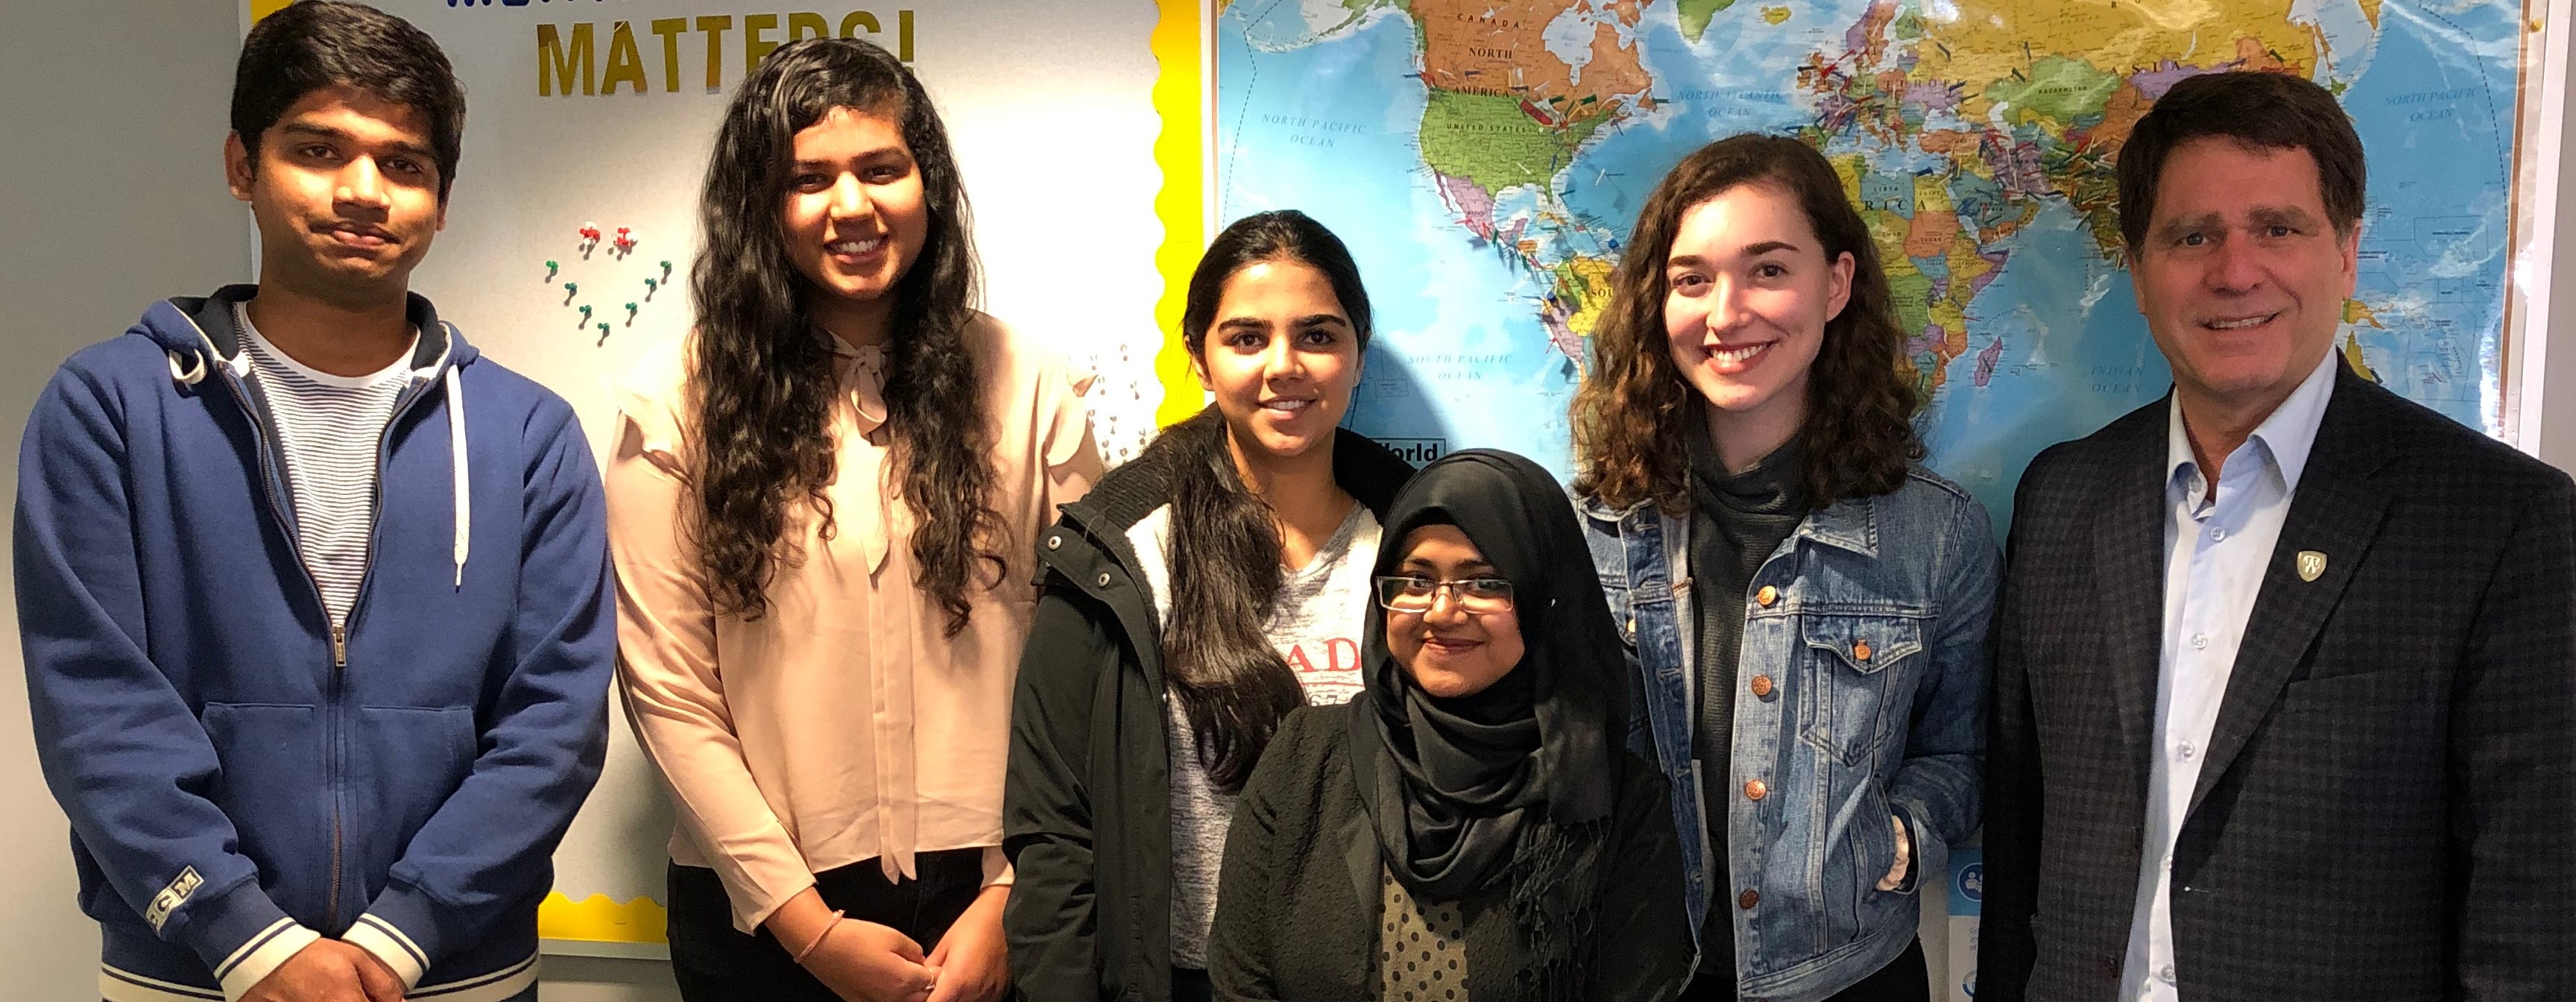 Dr. Smith with members of the International Student Learning Community, March 2019